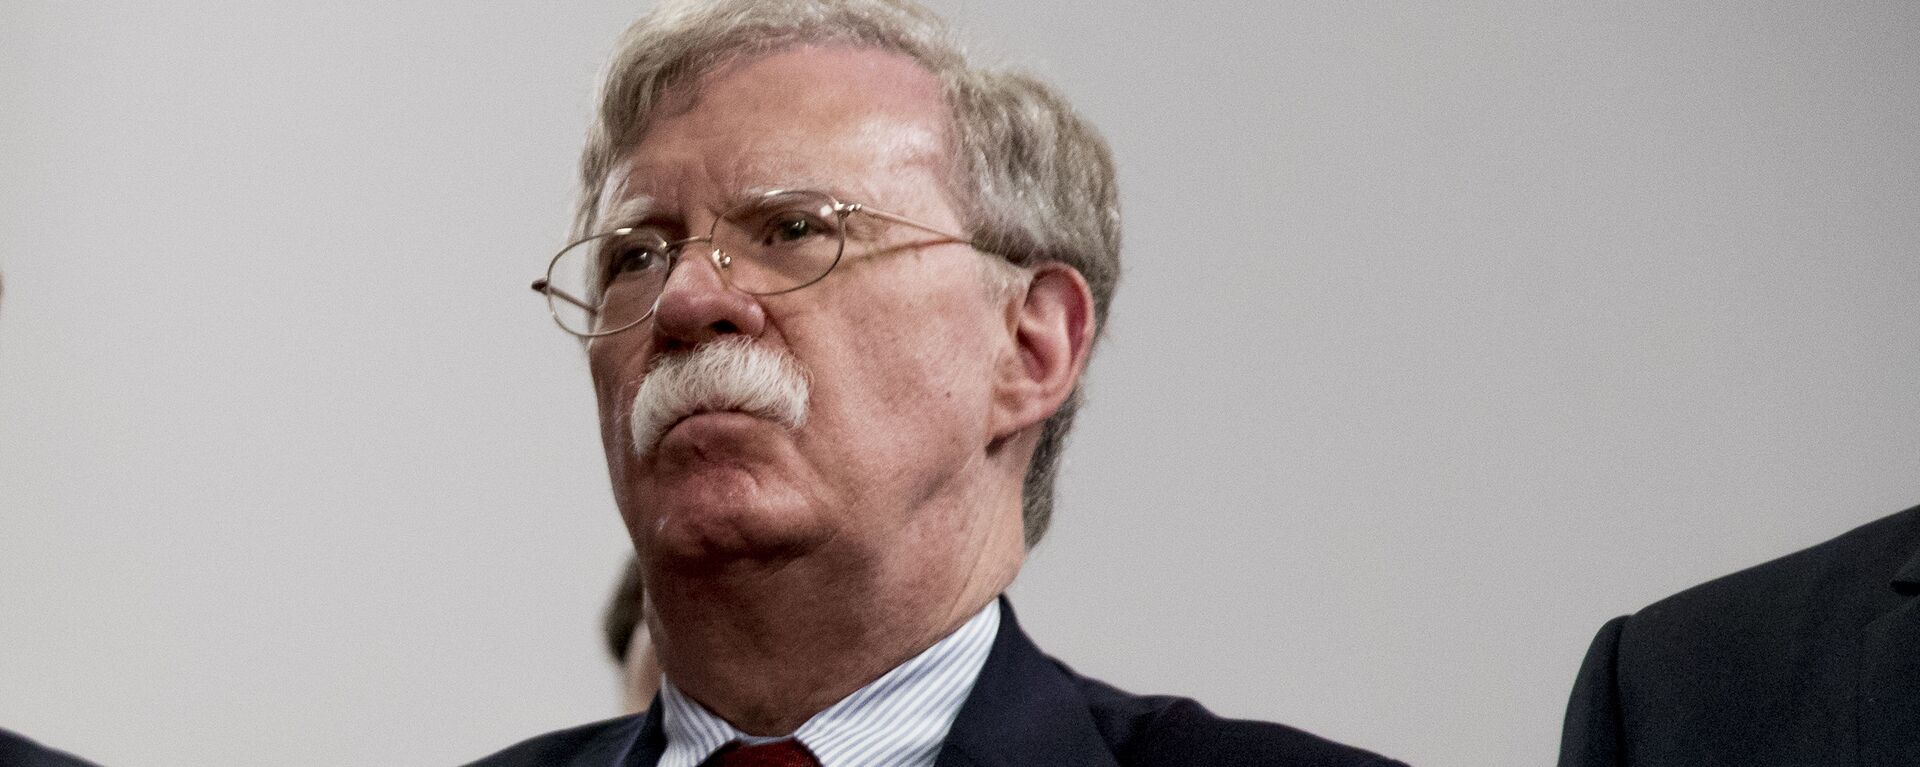 National Security Adviser John Bolton attends a meeting with President Donald Trump as he meets with Indian Prime Minister Narendra Modi at the G-7 summit in Biarritz, France, Monday, Aug. 26, 2019 - Sputnik International, 1920, 02.02.2023